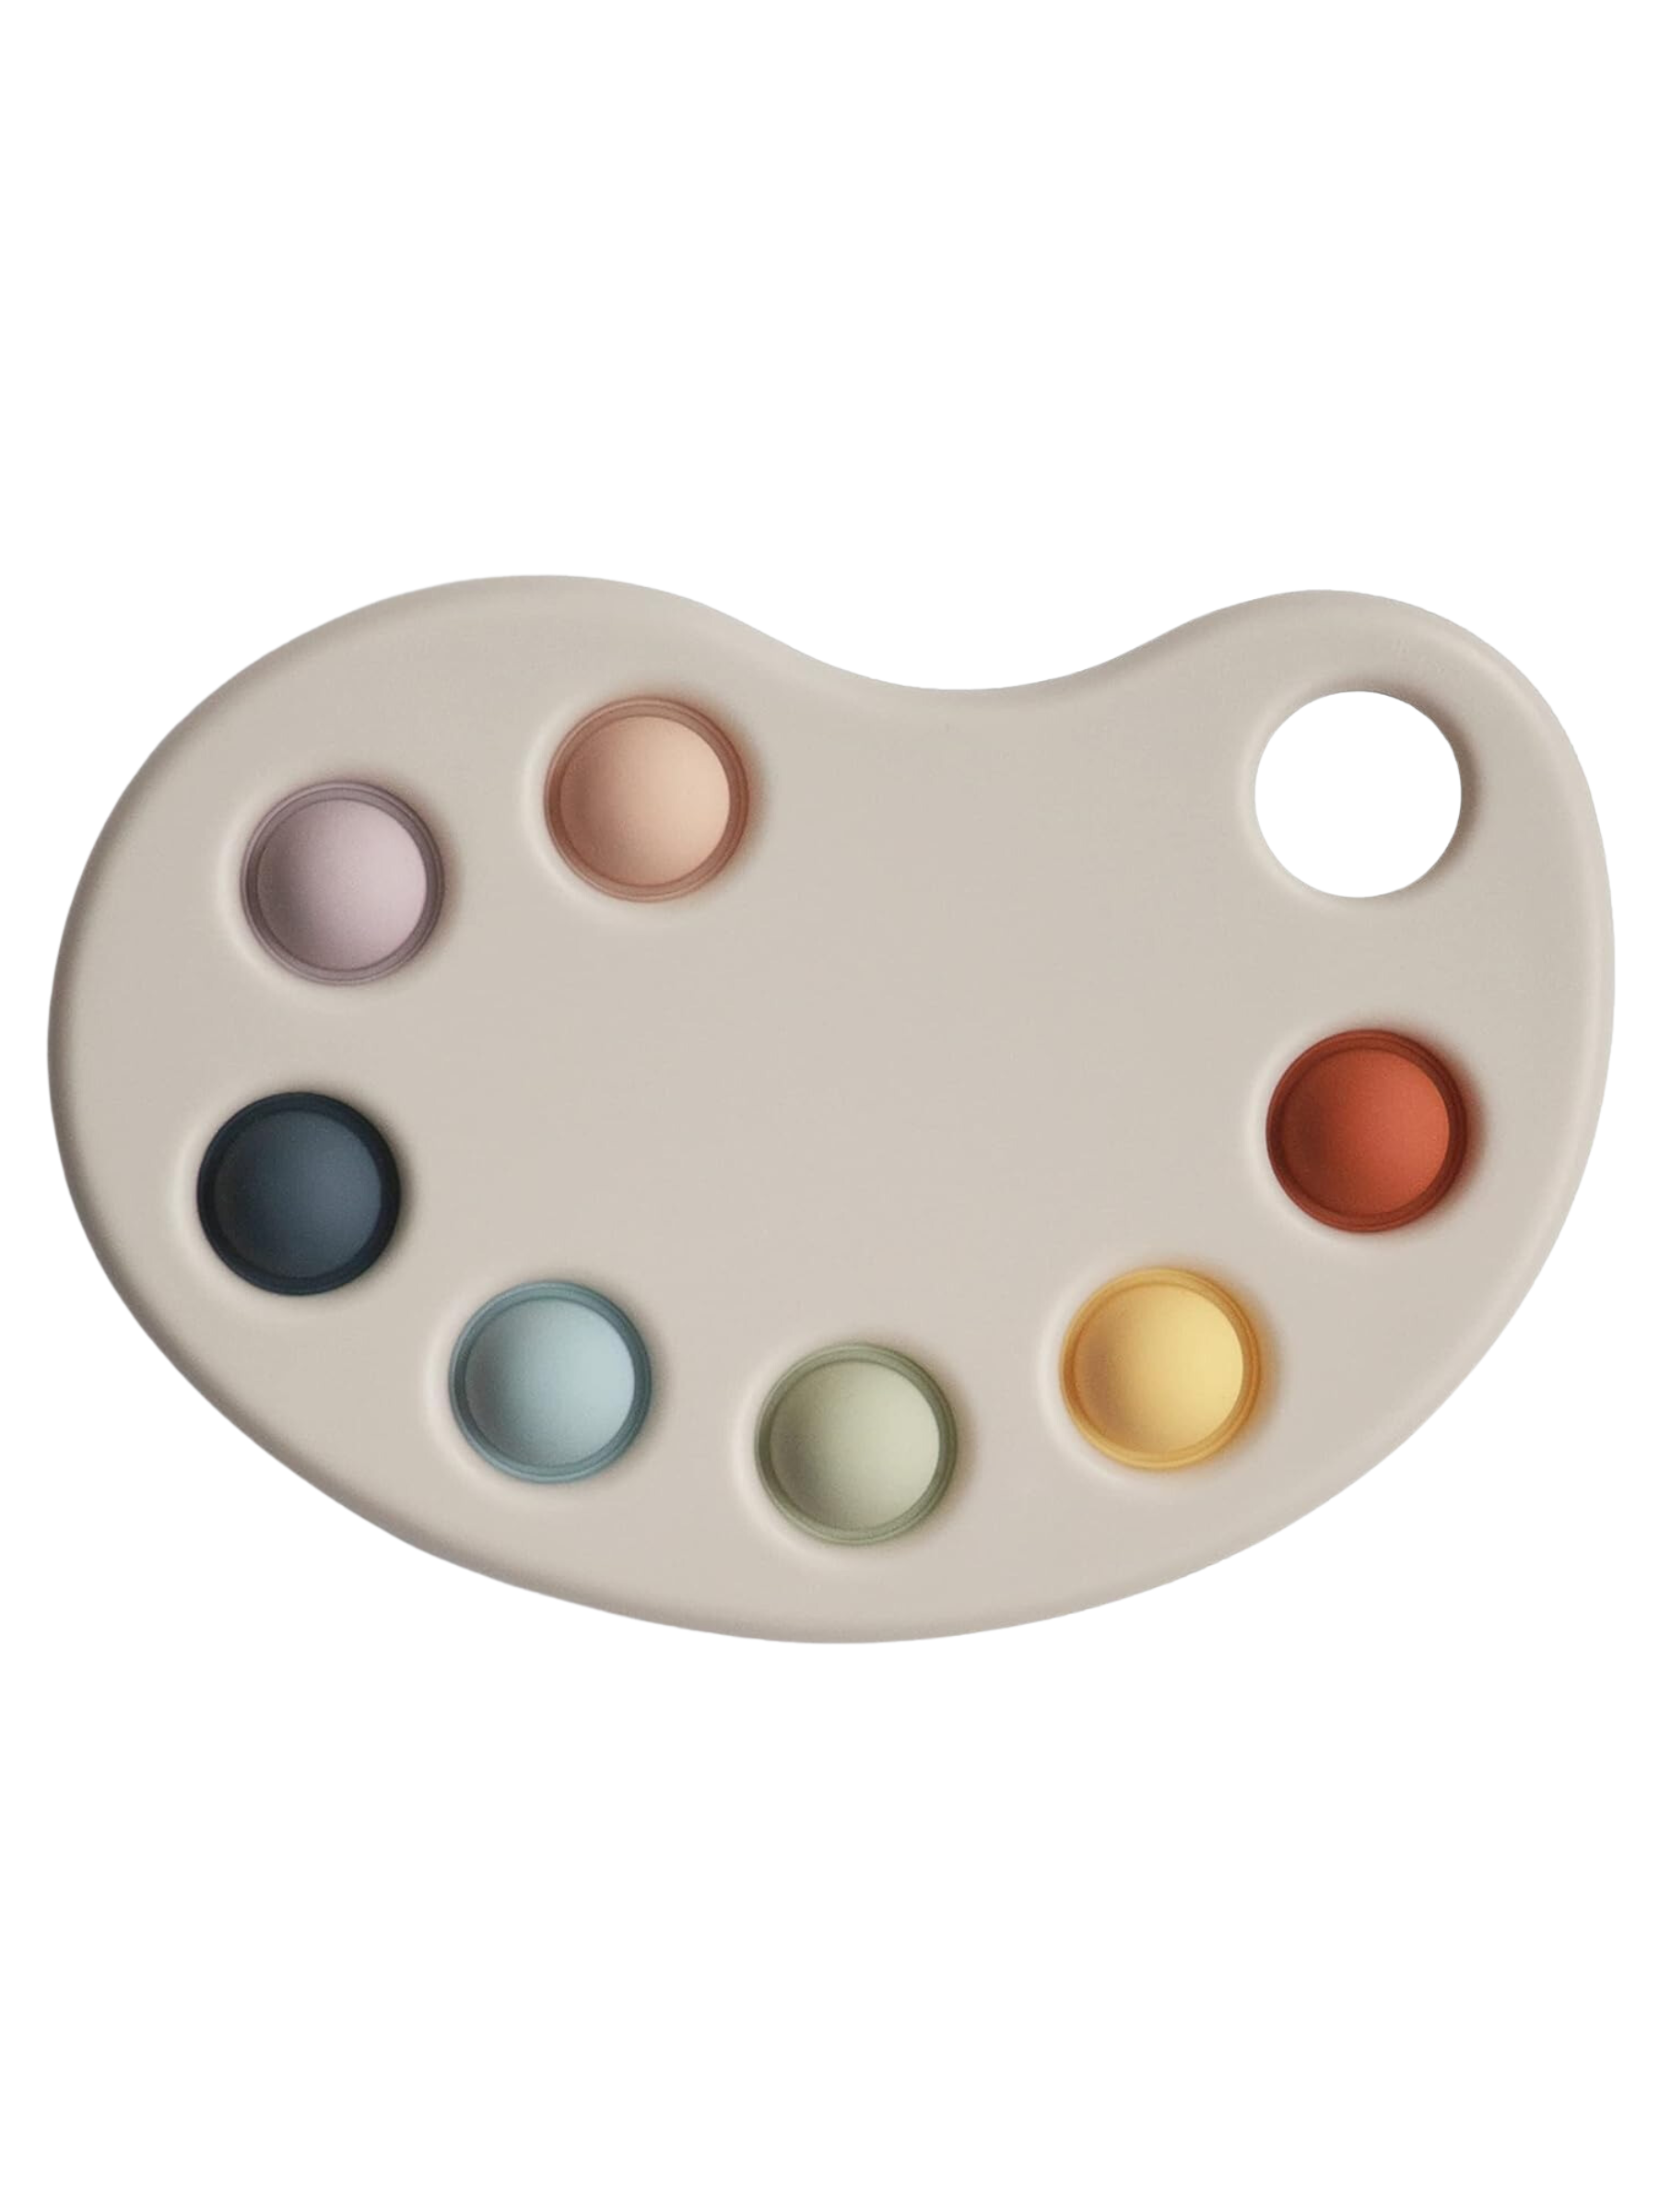 <p>Need something extra quiet for play in the car or on a plane? Silicone press toys are gaining traction as the new fidget spinners (you see versions of this in every goodie bag that comes home), but they’re much safer for babies to engage with. This aesthetically pleasing imitation paint palette will keep their little hands—and brains—occupied with minimal sound.</p> <p><strong>What our expert says:</strong> “My twins take theirs ('my poppy') everywhere, even their cribs at nap time. I don’t mind, because it’s quiet and mess-free.” <em>— Earley</em></p> $15, Amazon. <a href="https://www.amazon.com/mushie-Paint-Palette-Press-Toy/dp/B09Q5ZF94C">Get it now!</a><p>Sign up for today’s biggest stories, from pop culture to politics.</p><a href="https://www.glamour.com/newsletter/news?sourceCode=msnsend">Sign Up</a>